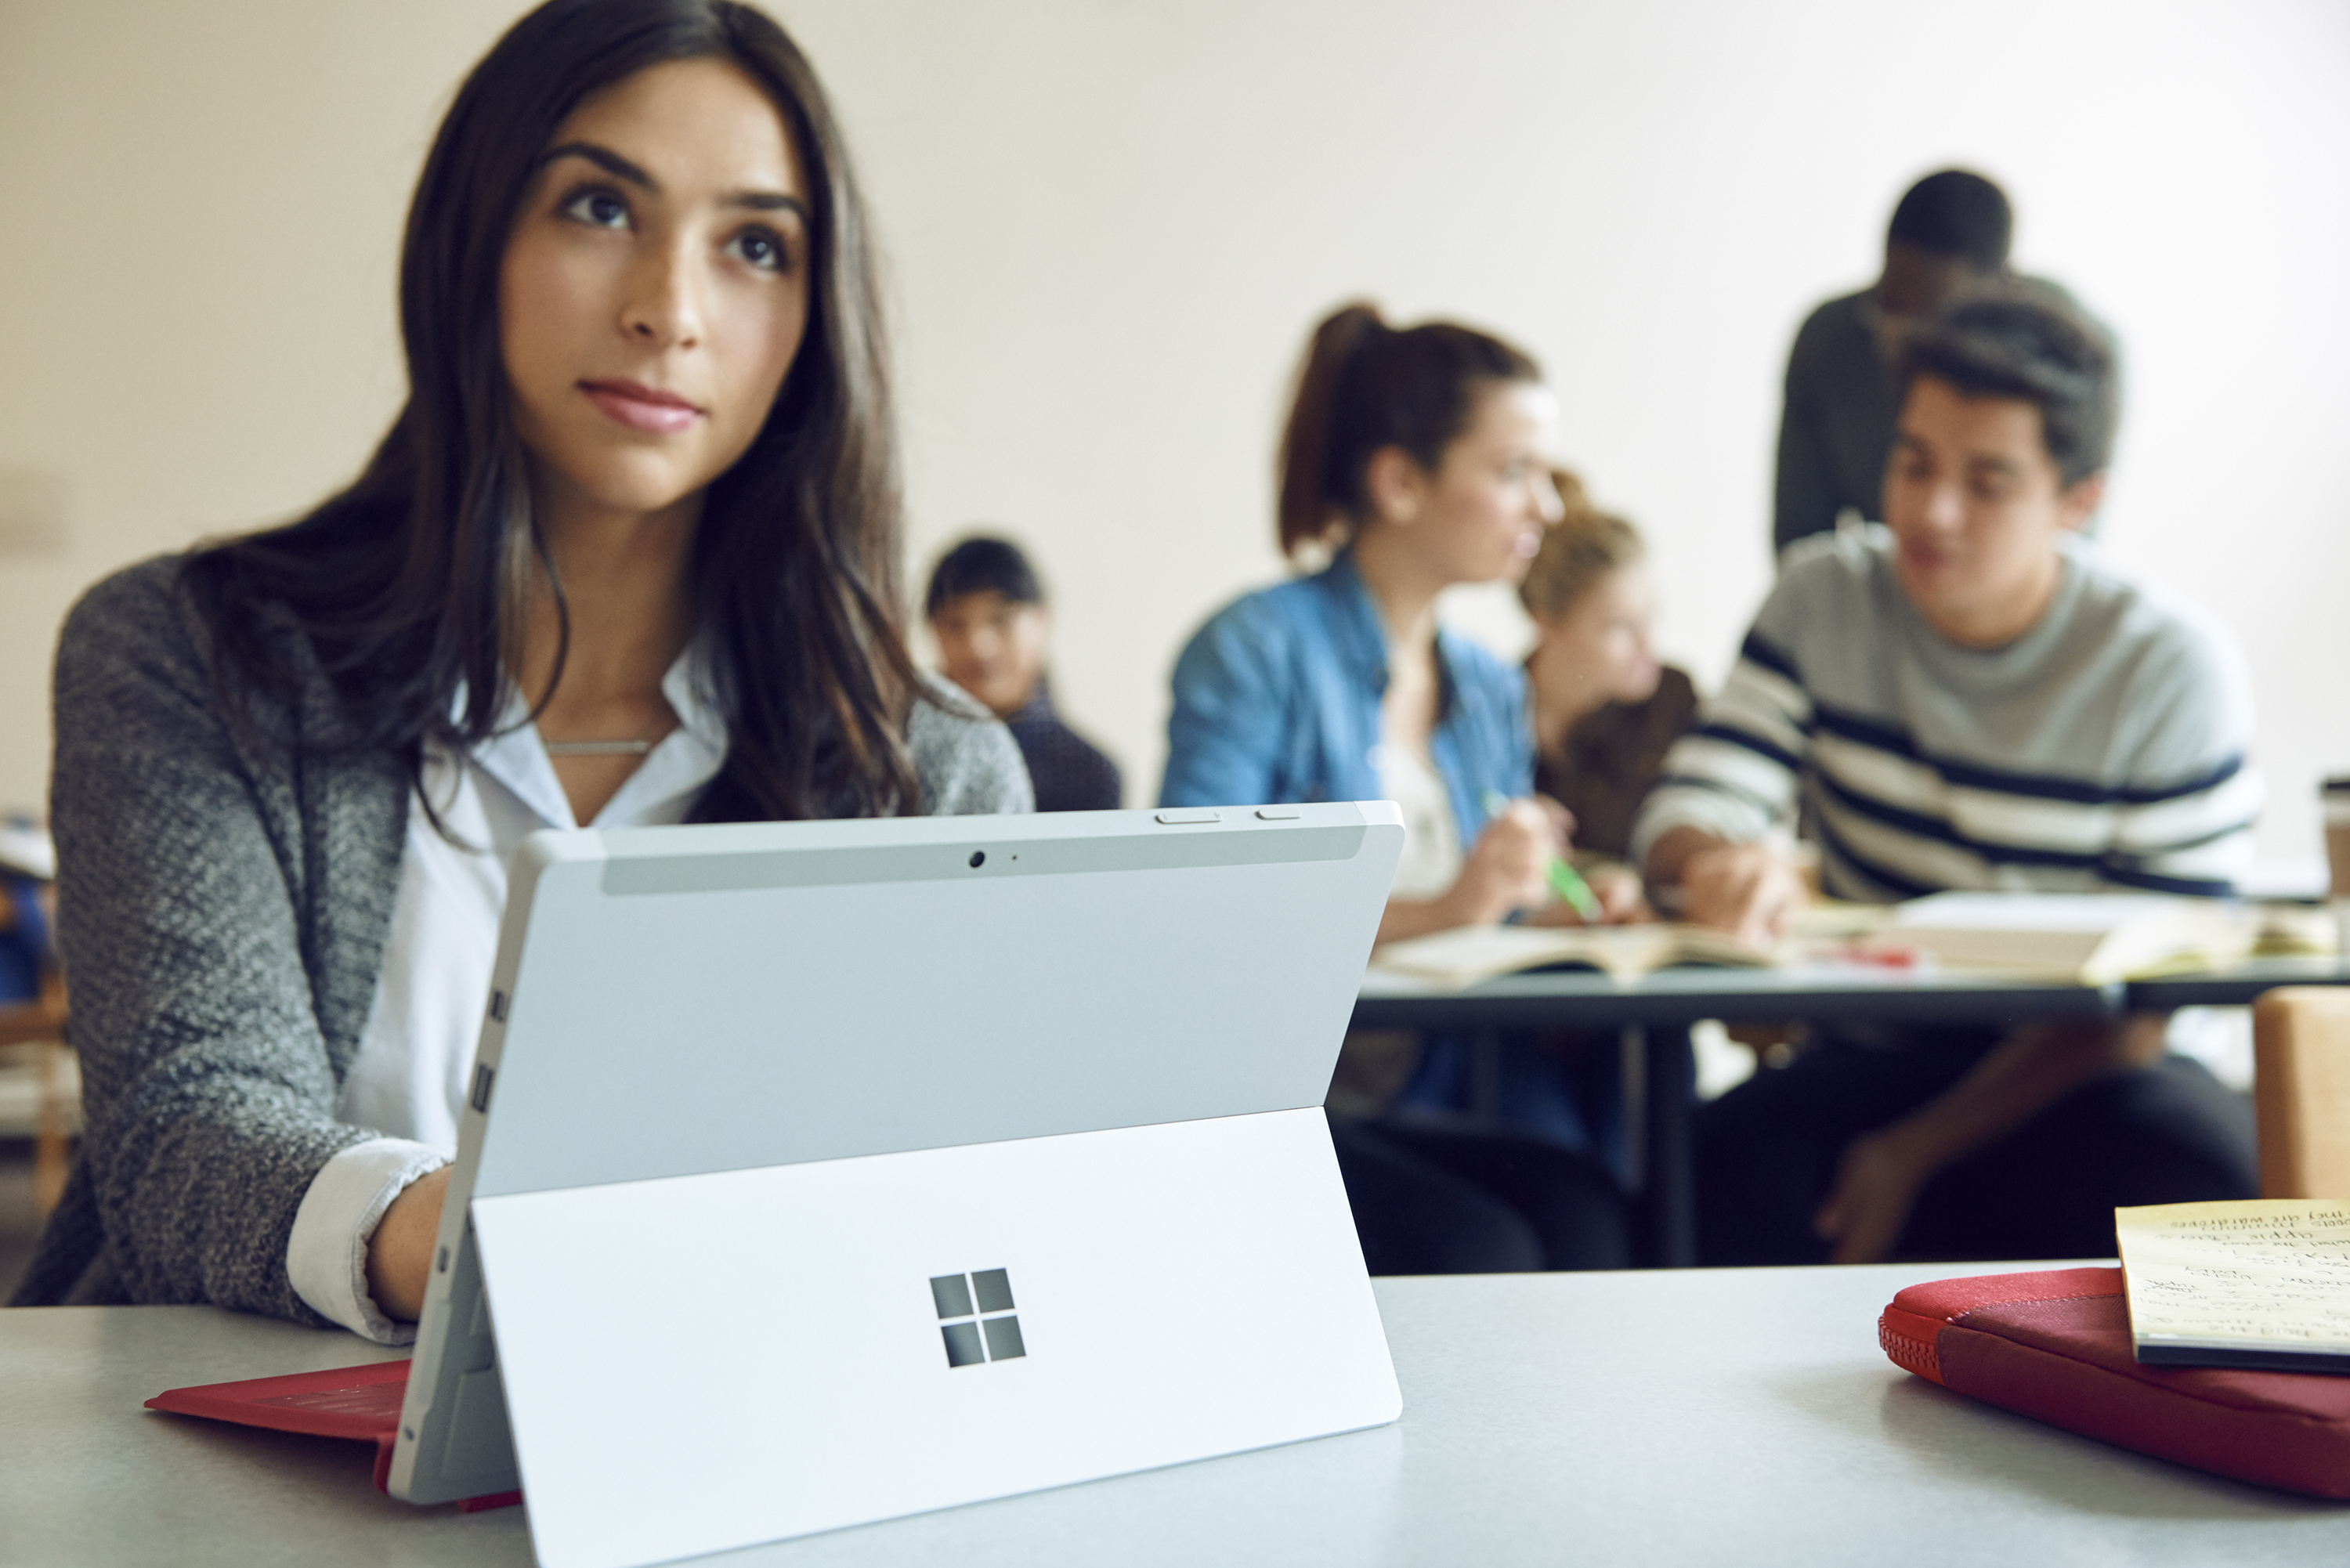 Female student using SUrface laptop in classroom